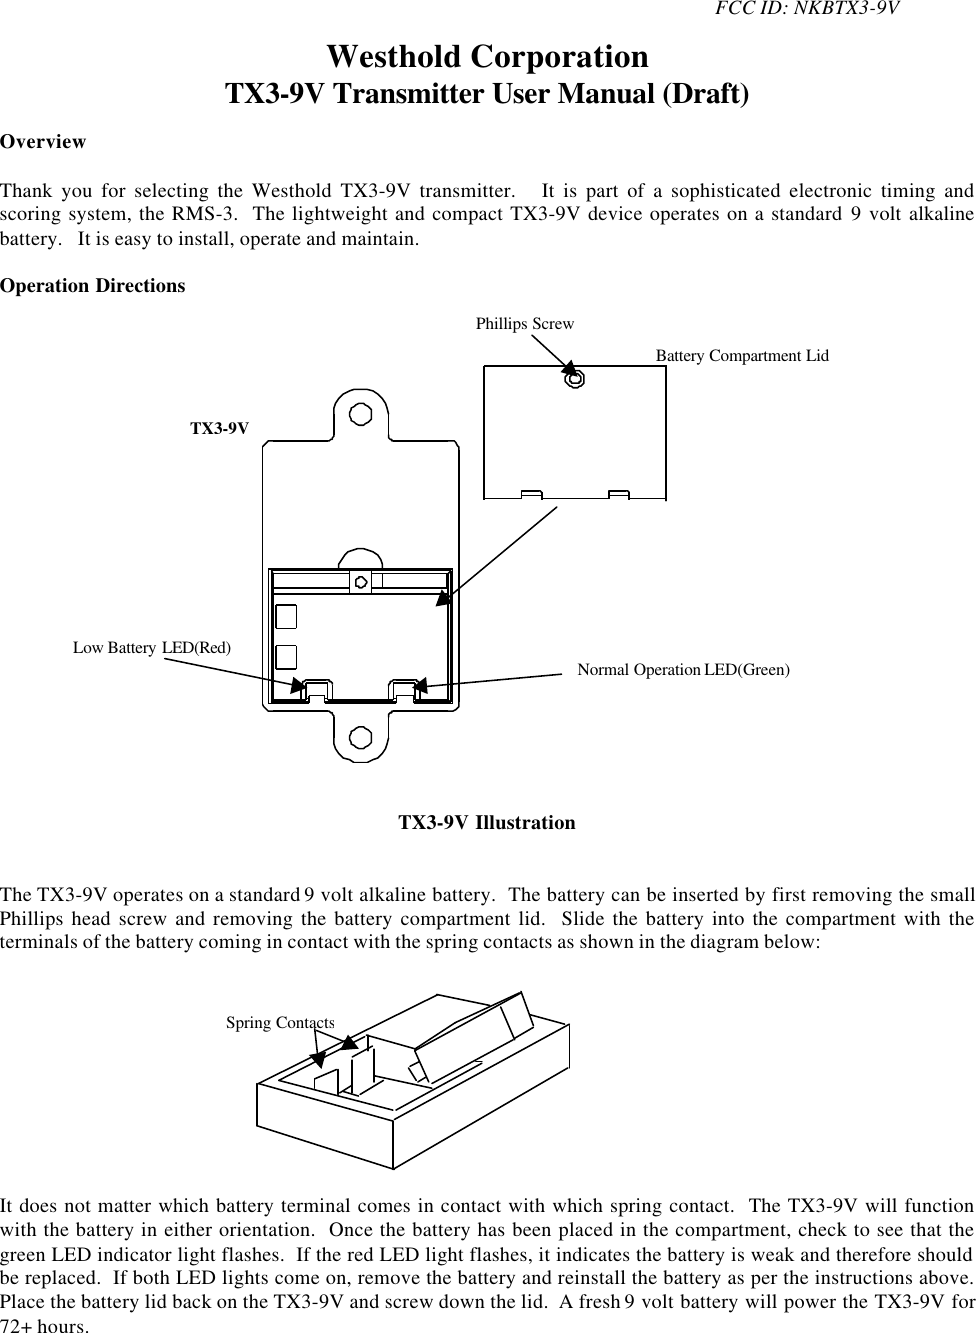 FCC ID: NKBTX3-9VWesthold CorporationTX3-9V Transmitter User Manual (Draft)OverviewThank you for selecting the Westhold TX3-9V transmitter.   It is part of a sophisticated electronic timing andscoring system, the RMS-3.  The lightweight and compact TX3-9V device operates on a standard 9 volt alkalinebattery.   It is easy to install, operate and maintain.Operation DirectionsTX3-9V IllustrationThe TX3-9V operates on a standard 9 volt alkaline battery.  The battery can be inserted by first removing the smallPhillips head screw and removing the battery compartment lid.  Slide the battery into the compartment with theterminals of the battery coming in contact with the spring contacts as shown in the diagram below:It does not matter which battery terminal comes in contact with which spring contact.  The TX3-9V will functionwith the battery in either orientation.  Once the battery has been placed in the compartment, check to see that thegreen LED indicator light flashes.  If the red LED light flashes, it indicates the battery is weak and therefore shouldbe replaced.  If both LED lights come on, remove the battery and reinstall the battery as per the instructions above.Place the battery lid back on the TX3-9V and screw down the lid.  A fresh 9 volt battery will power the TX3-9V for72+ hours.Battery Compartment LidLow Battery LED(Red)Normal Operation LED(Green)TX3-9VPhillips ScrewSpring Contacts